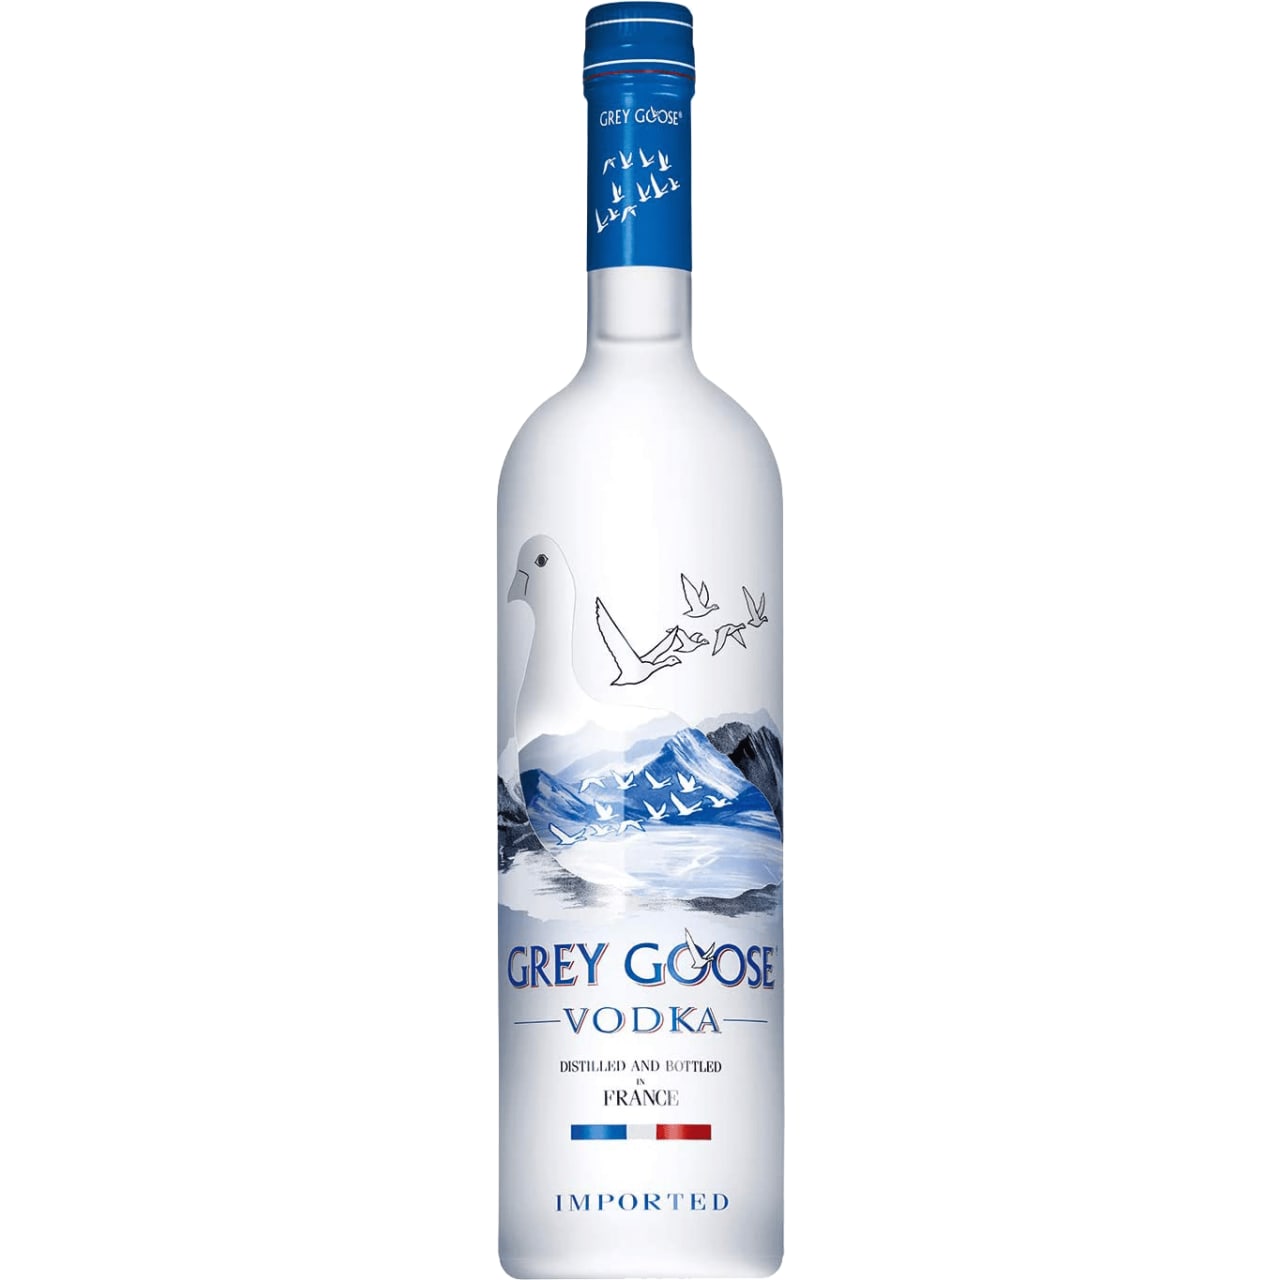 Distilled and bottled in France, Grey Goose is made in the Picardy region just outside Paris. A well draws water from an aquifer 500 feet beneath the ground, ensuring it has been untouched by human hands and pollution. Made from the finest winter wheat, this vodka is smooth and gentle with hints of almond and fresh citrus.